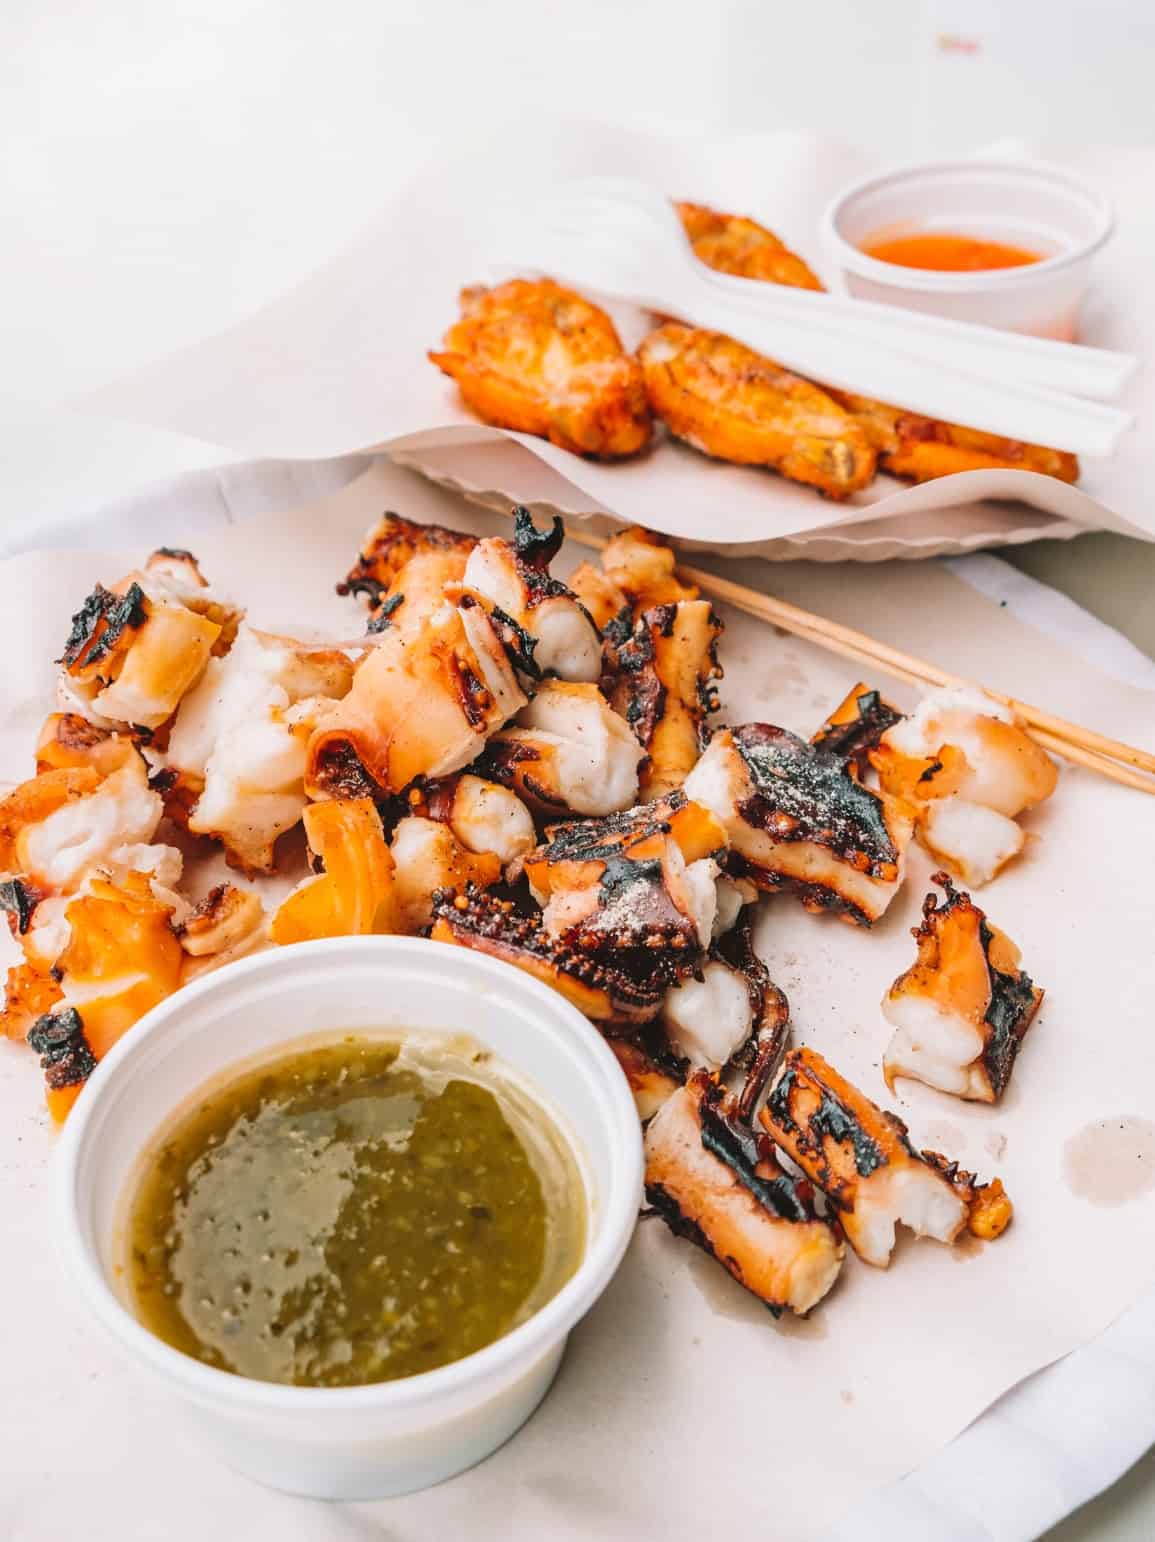 Octopus skewers and baked chicken wings from the Beyond Night Market Phuket